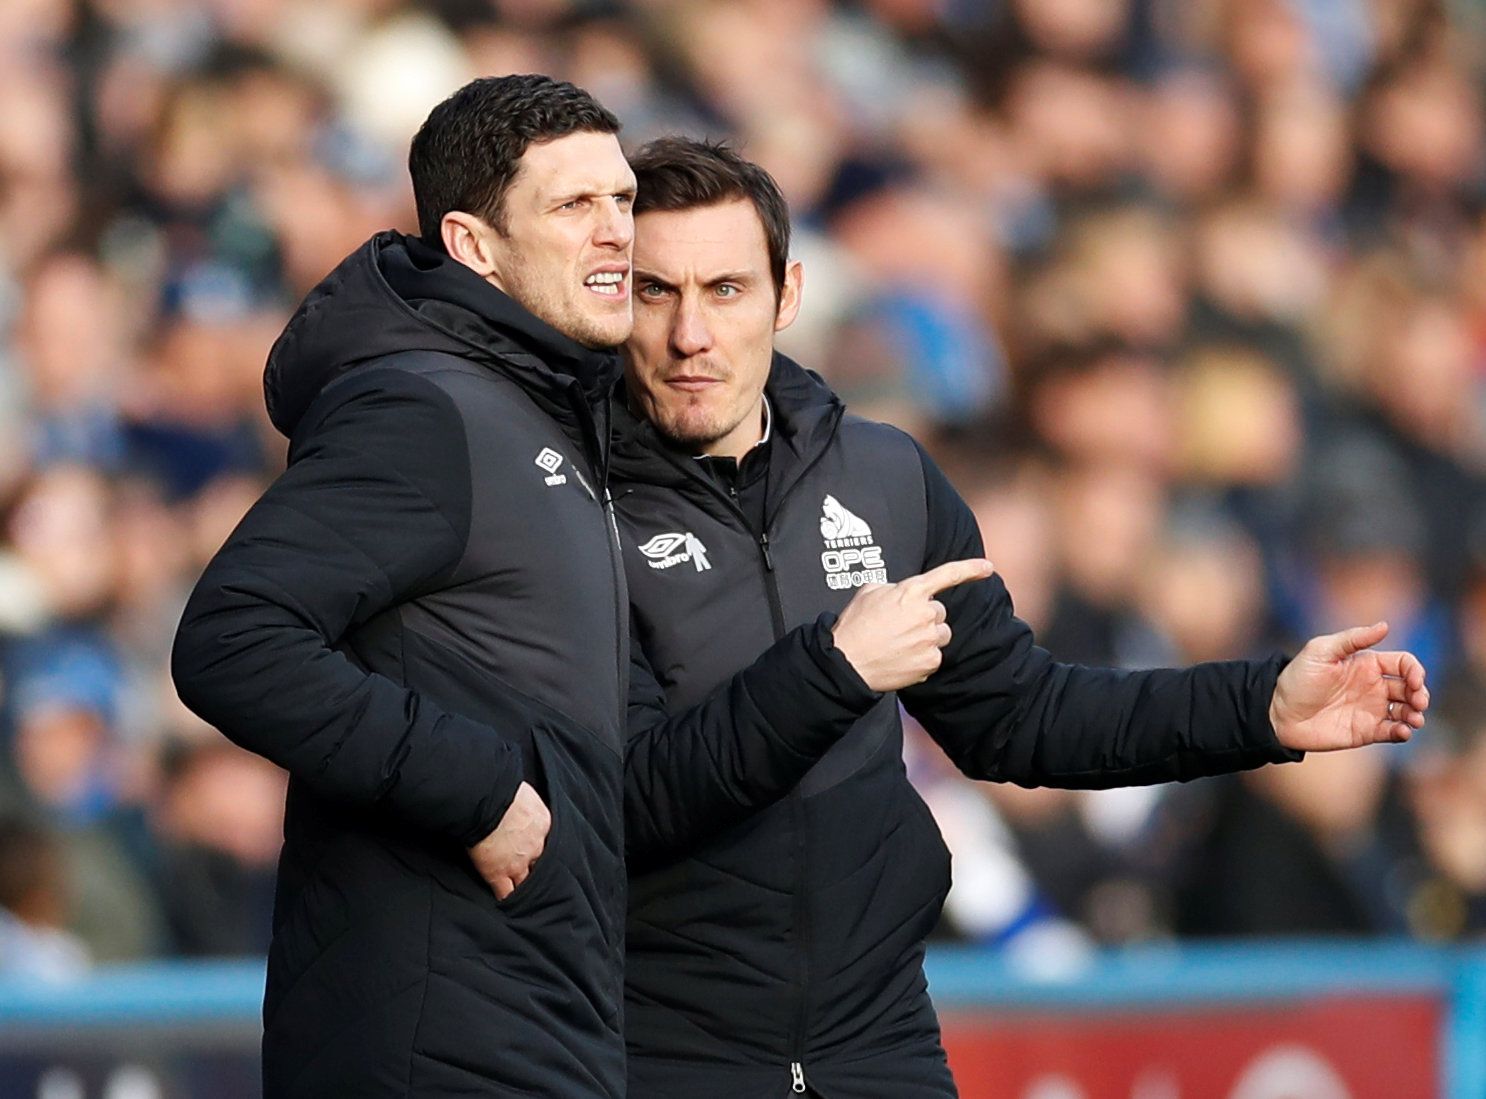 Soccer Football - Premier League - Huddersfield Town v Manchester City - John Smith's Stadium, Huddersfield, Britain - January 20, 2019  Huddersfield Town caretaker manager Mark Hudson and assistant coach Dean Whitehead during the match   Action Images via Reuters/Carl Recine  EDITORIAL USE ONLY. No use with unauthorized audio, video, data, fixture lists, club/league logos or 